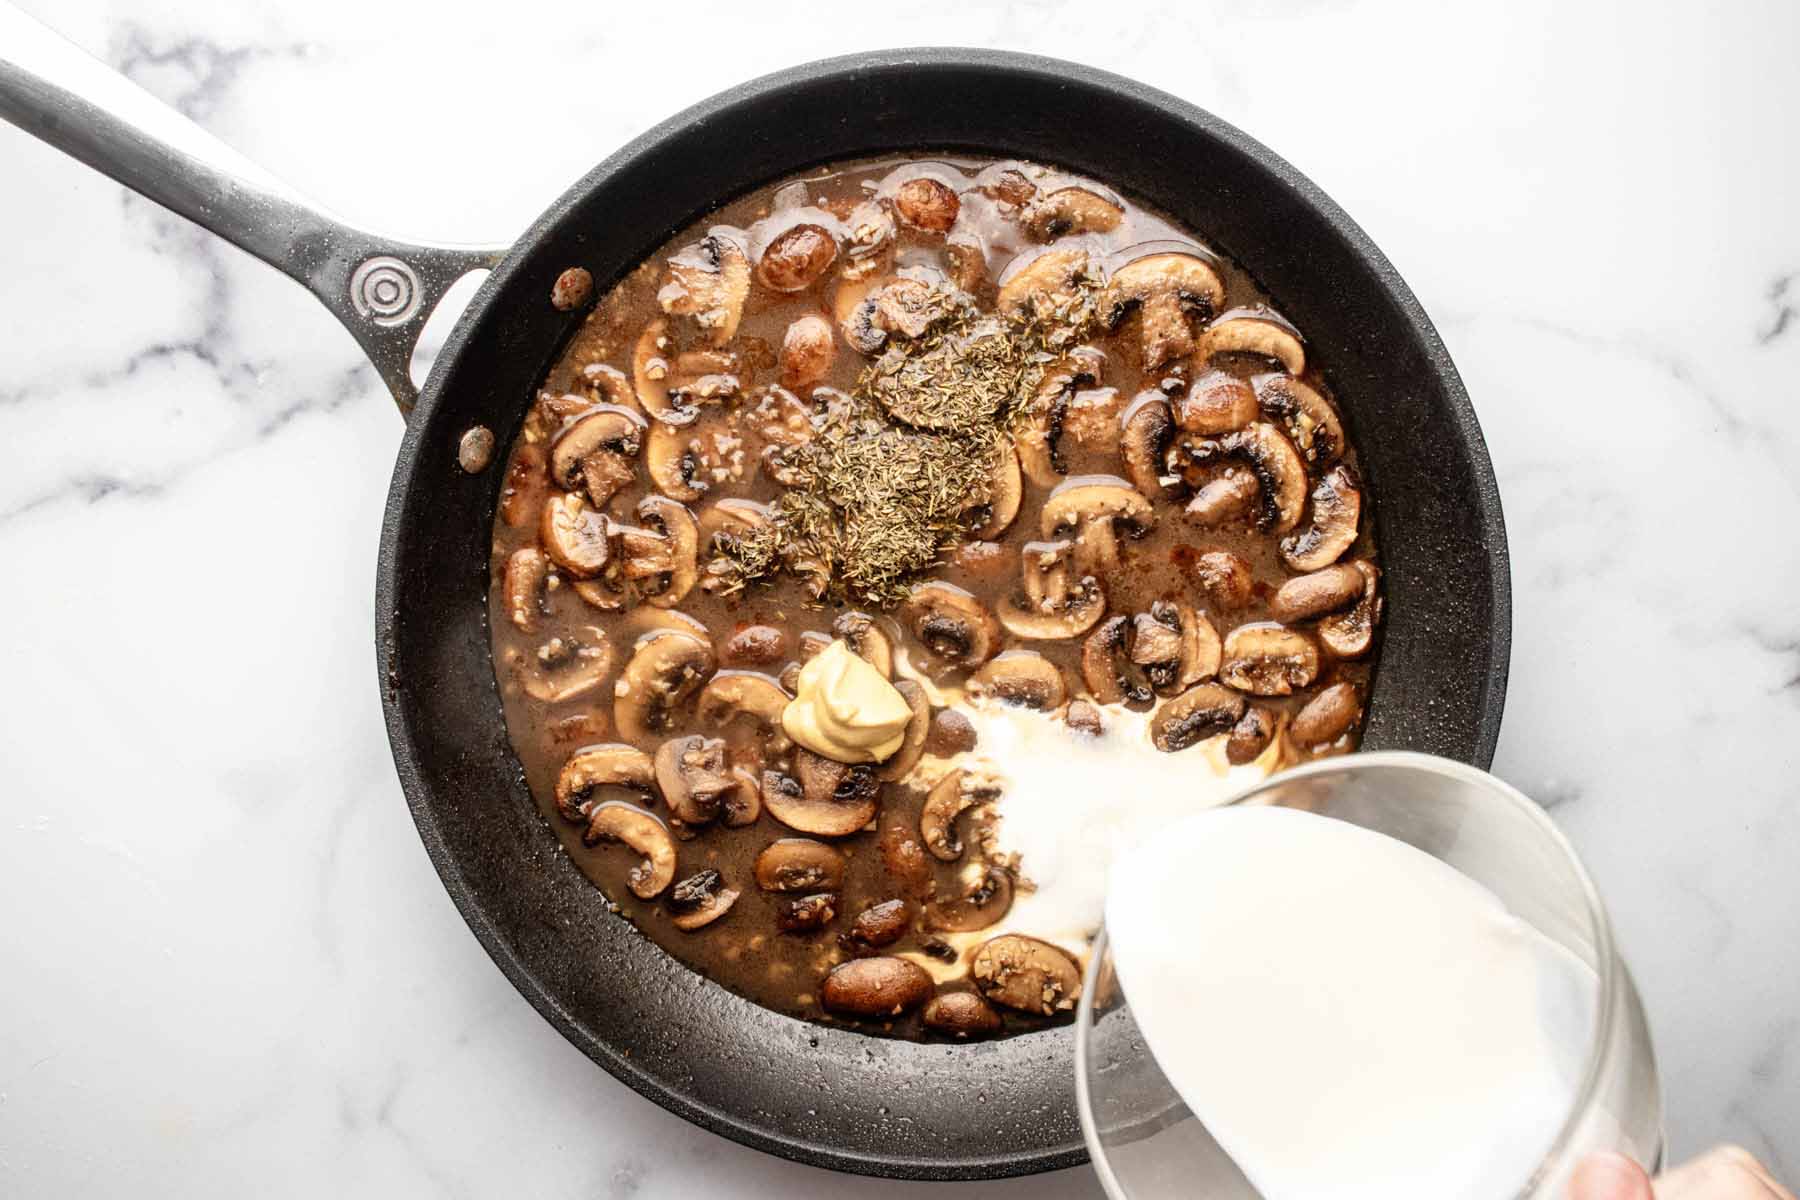 Heavy cream being poured into skillet with mushrooms, mustard, and thyme leaves.